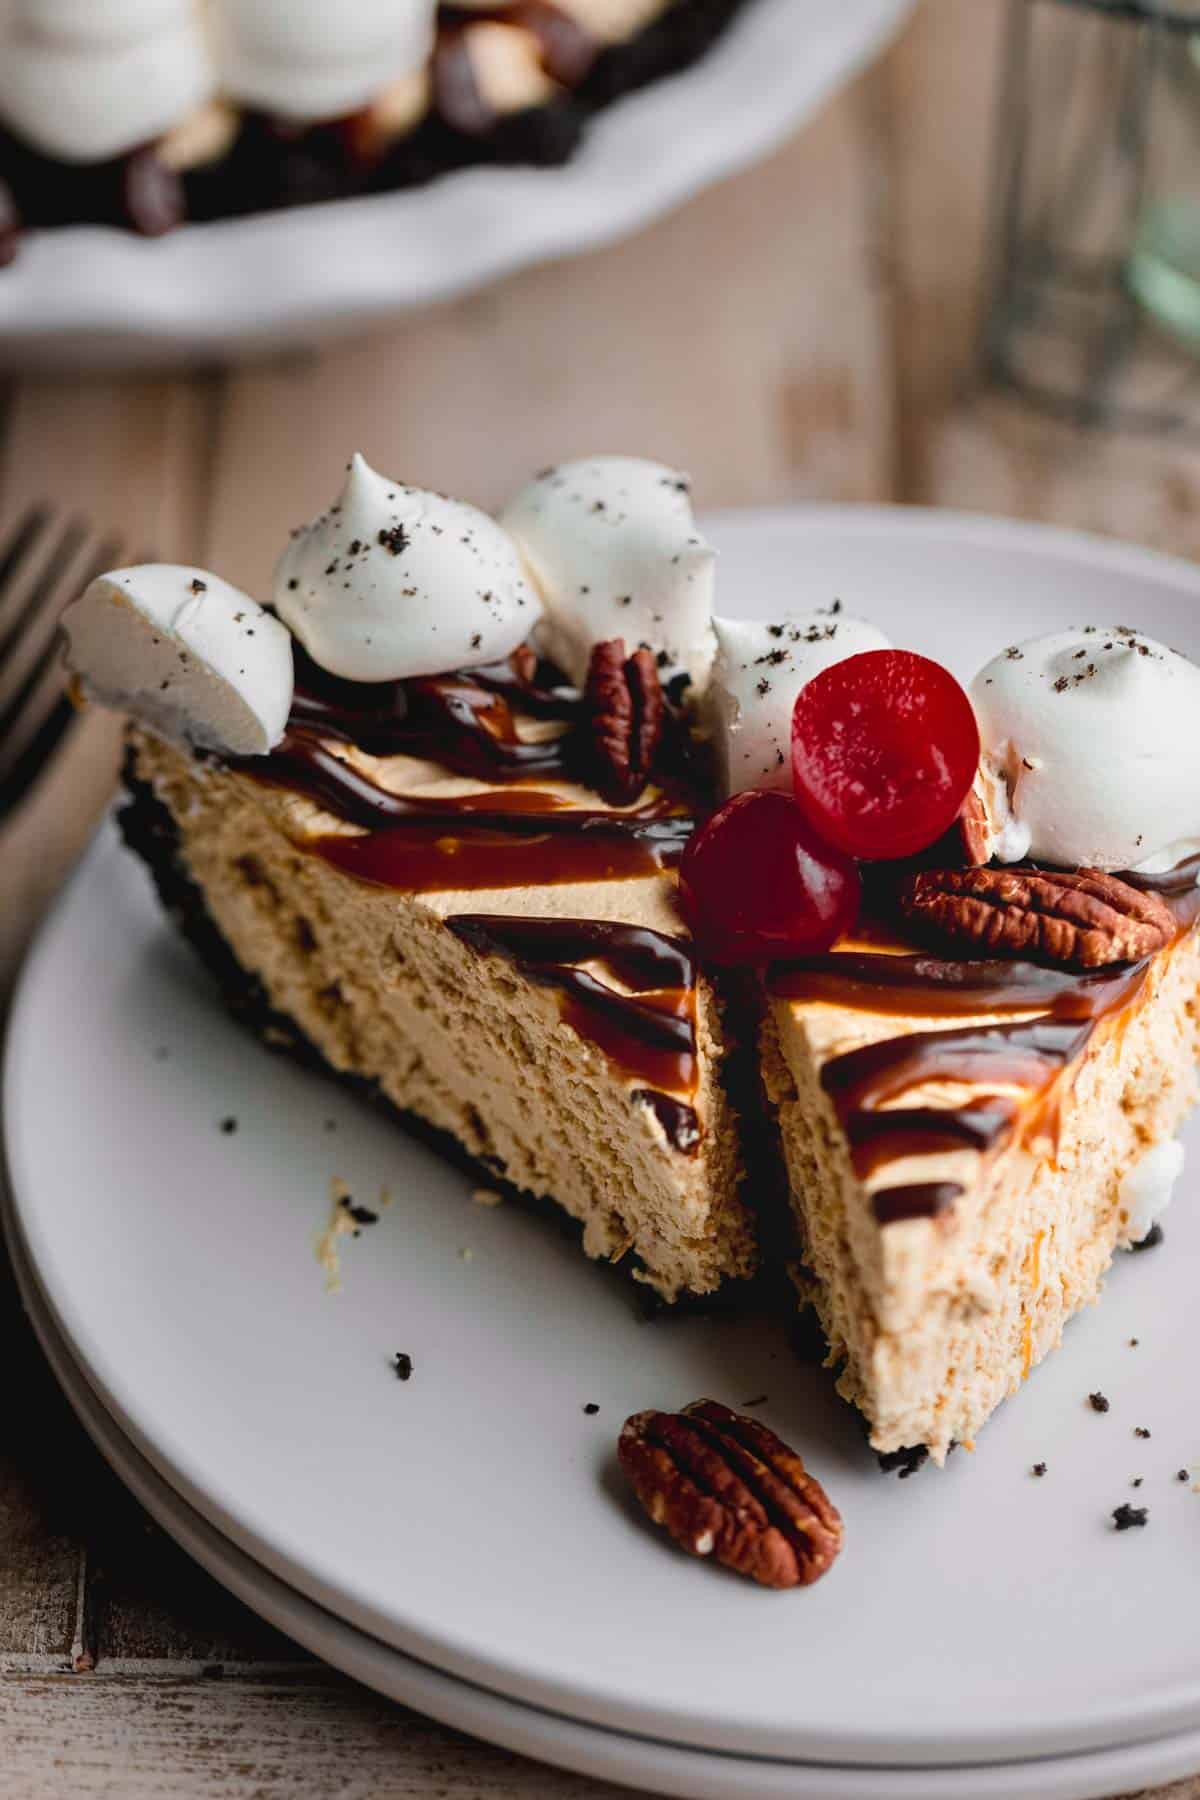 No bake Turtle pie with chocolate ganache, caramel sauce, cherries and cool whip.